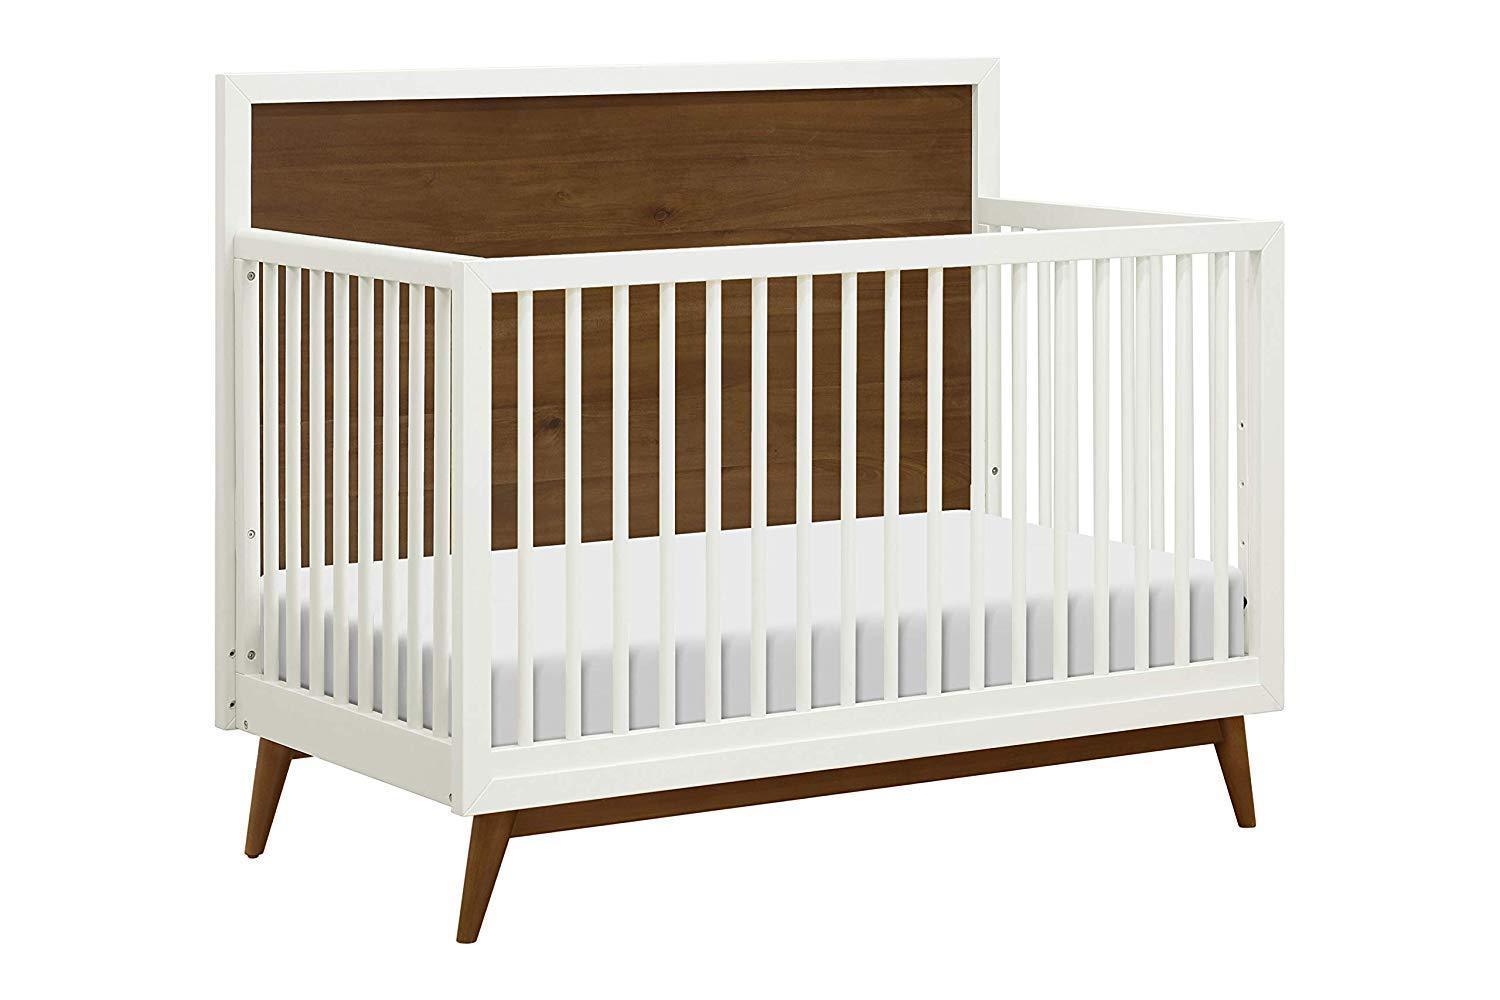 Babyletto Palma 4-in-1 Convertible Crib call store to order